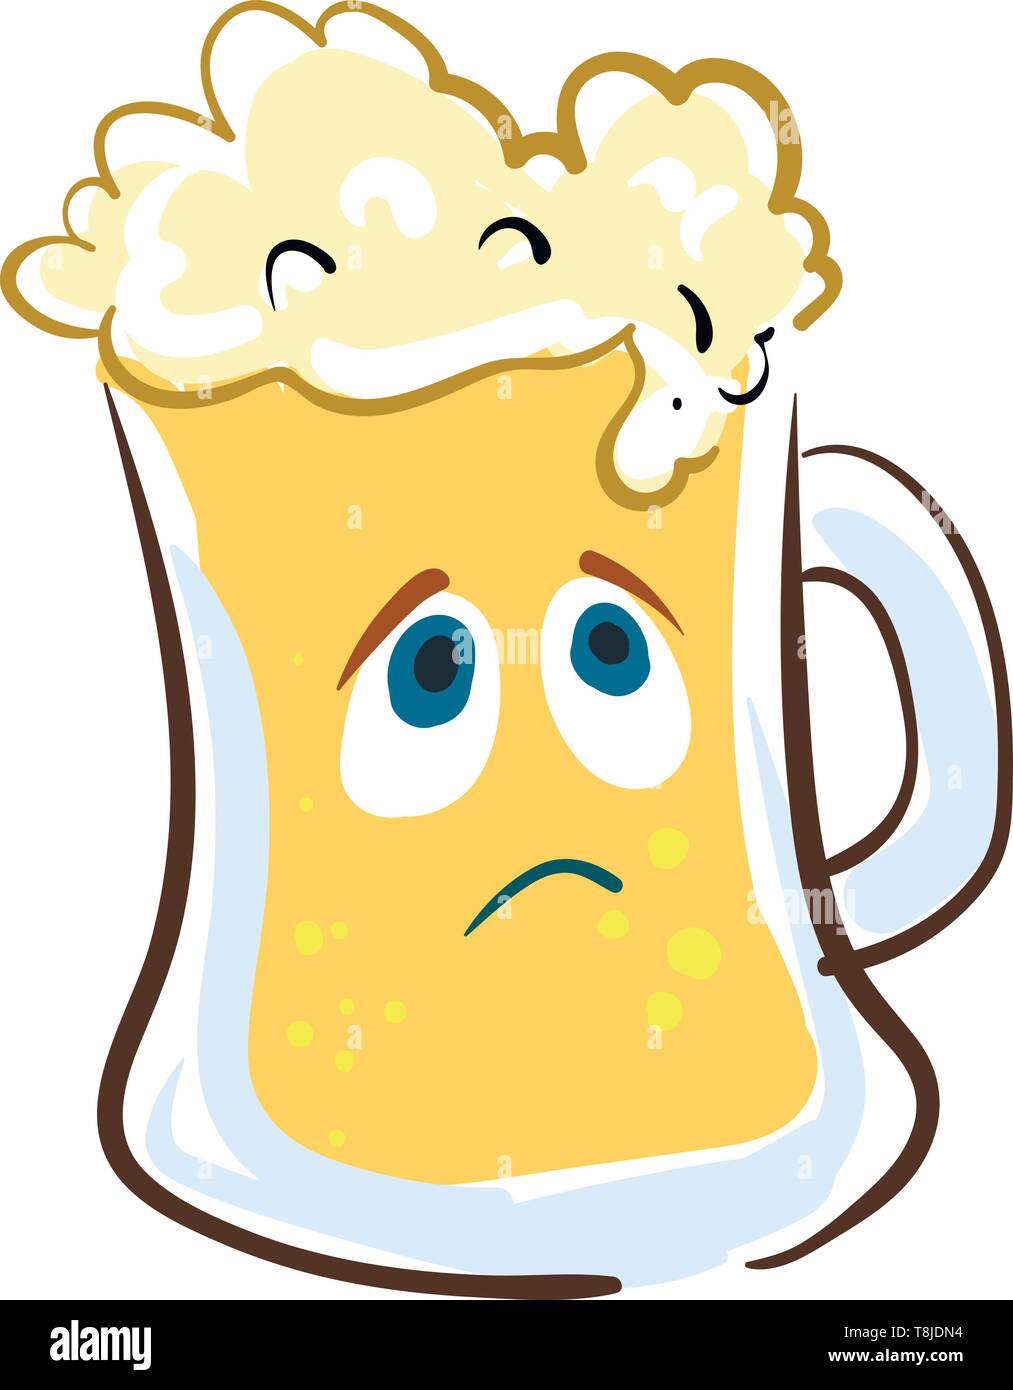 A yellow colored beer mug overflowing with frothy beer from the top, vector, color drawing or illustration. Stock Vector